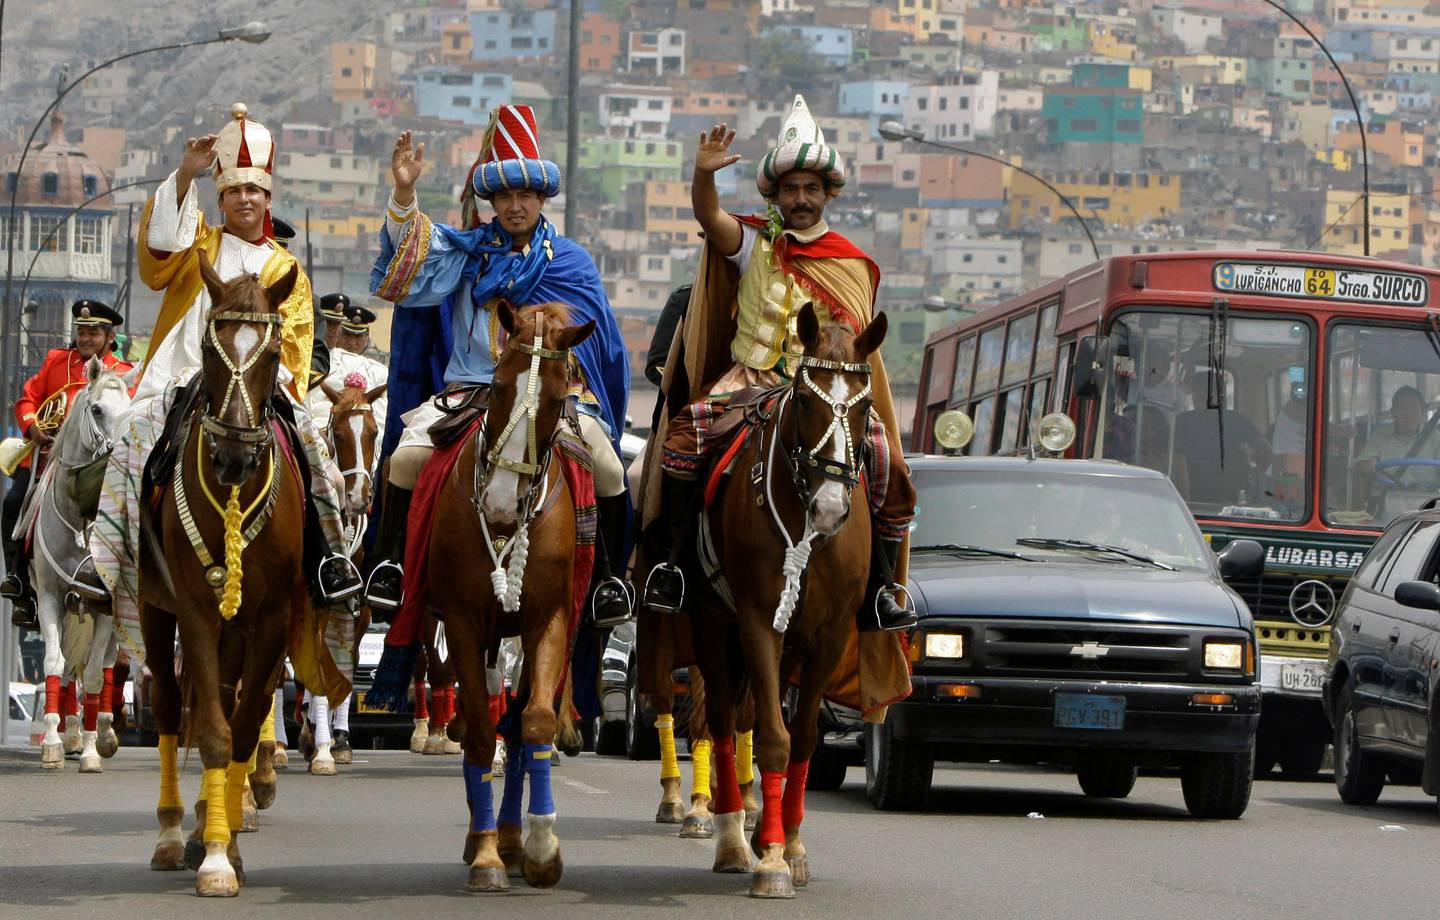 Police officers Juan Polo, left, Tomas Diaz, center, and Pablo Villa dressed as the Three Wise Men or Three Kings parade in Lima, Tuesday, Jan. 6, 2009. On the Epiphany, the Catholic Church marks the visit of the Three Kings or Wise Men, to the baby Jesus in Bethlehem. (AP Photo/Martin Mejia)